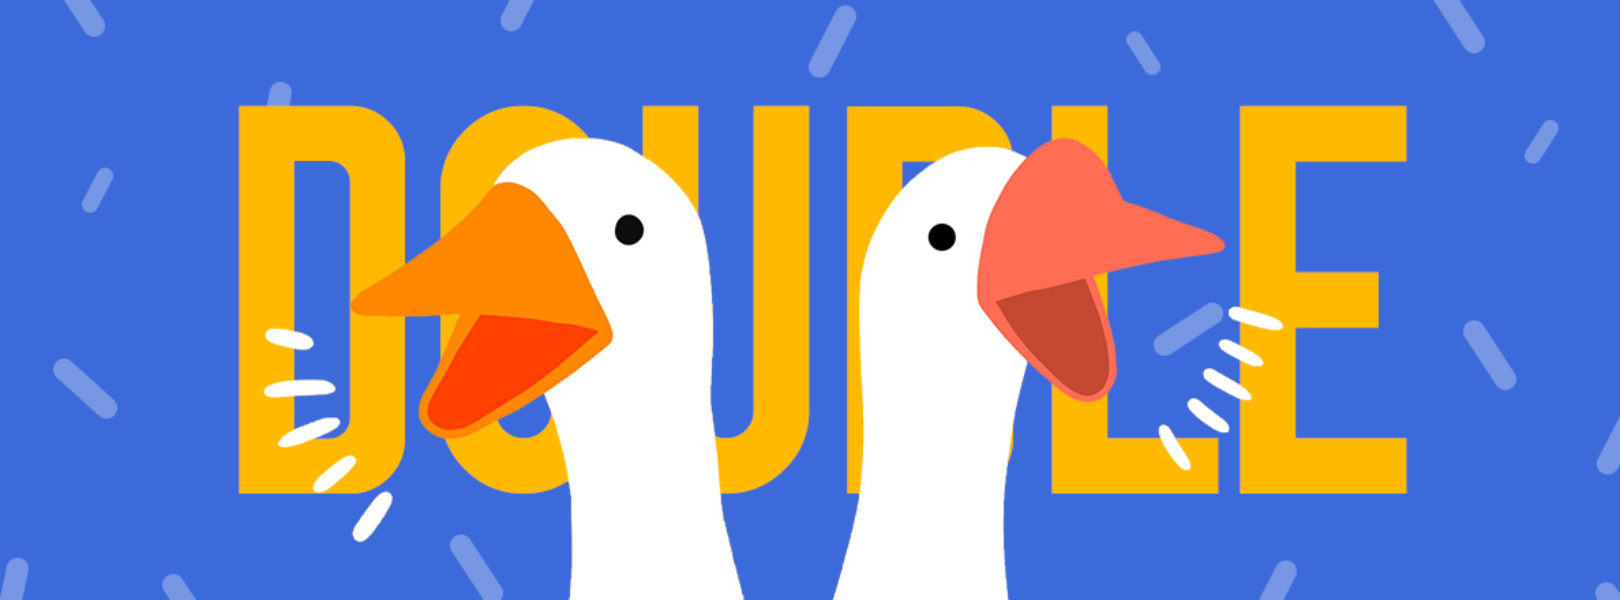 untitled goose game profile picture